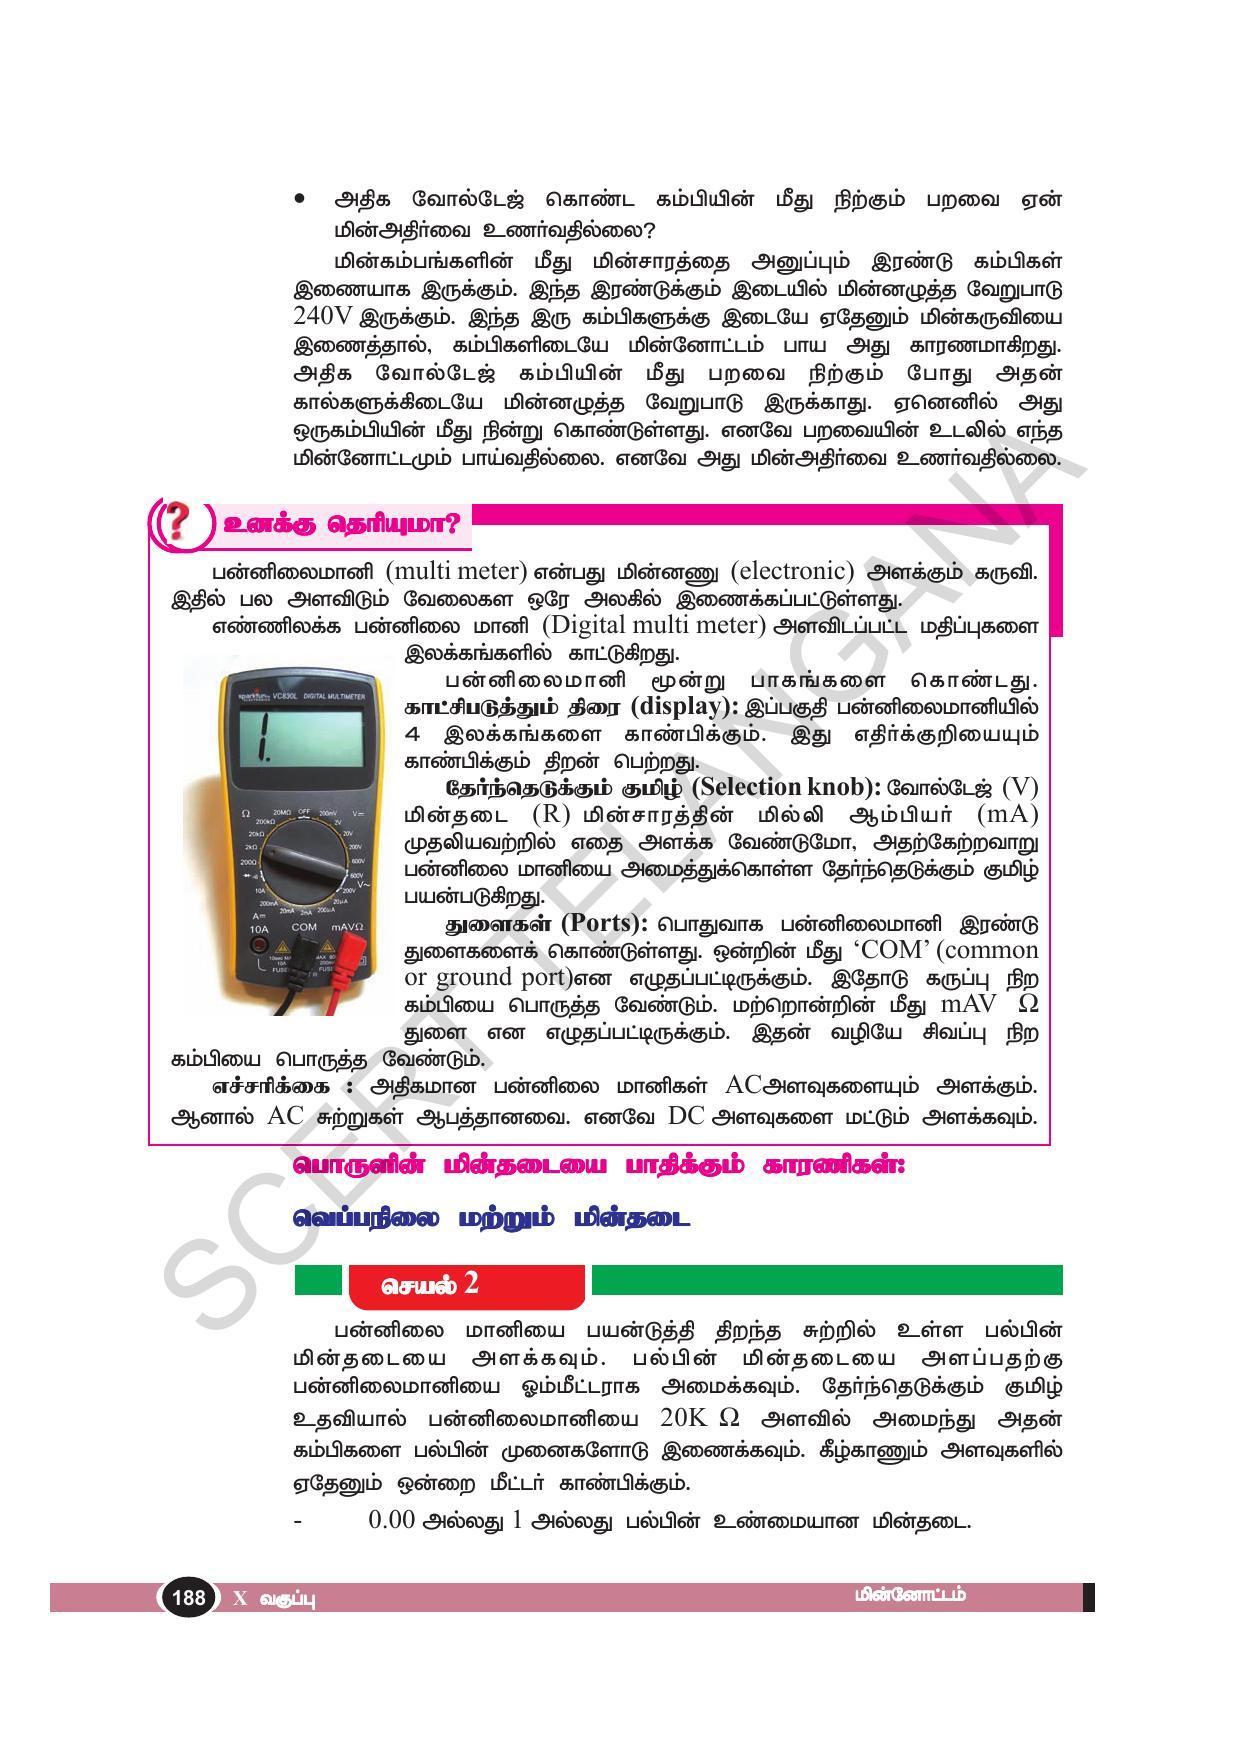 TS SCERT Class 10 Physical Science(Tamil Medium) Text Book - Page 200